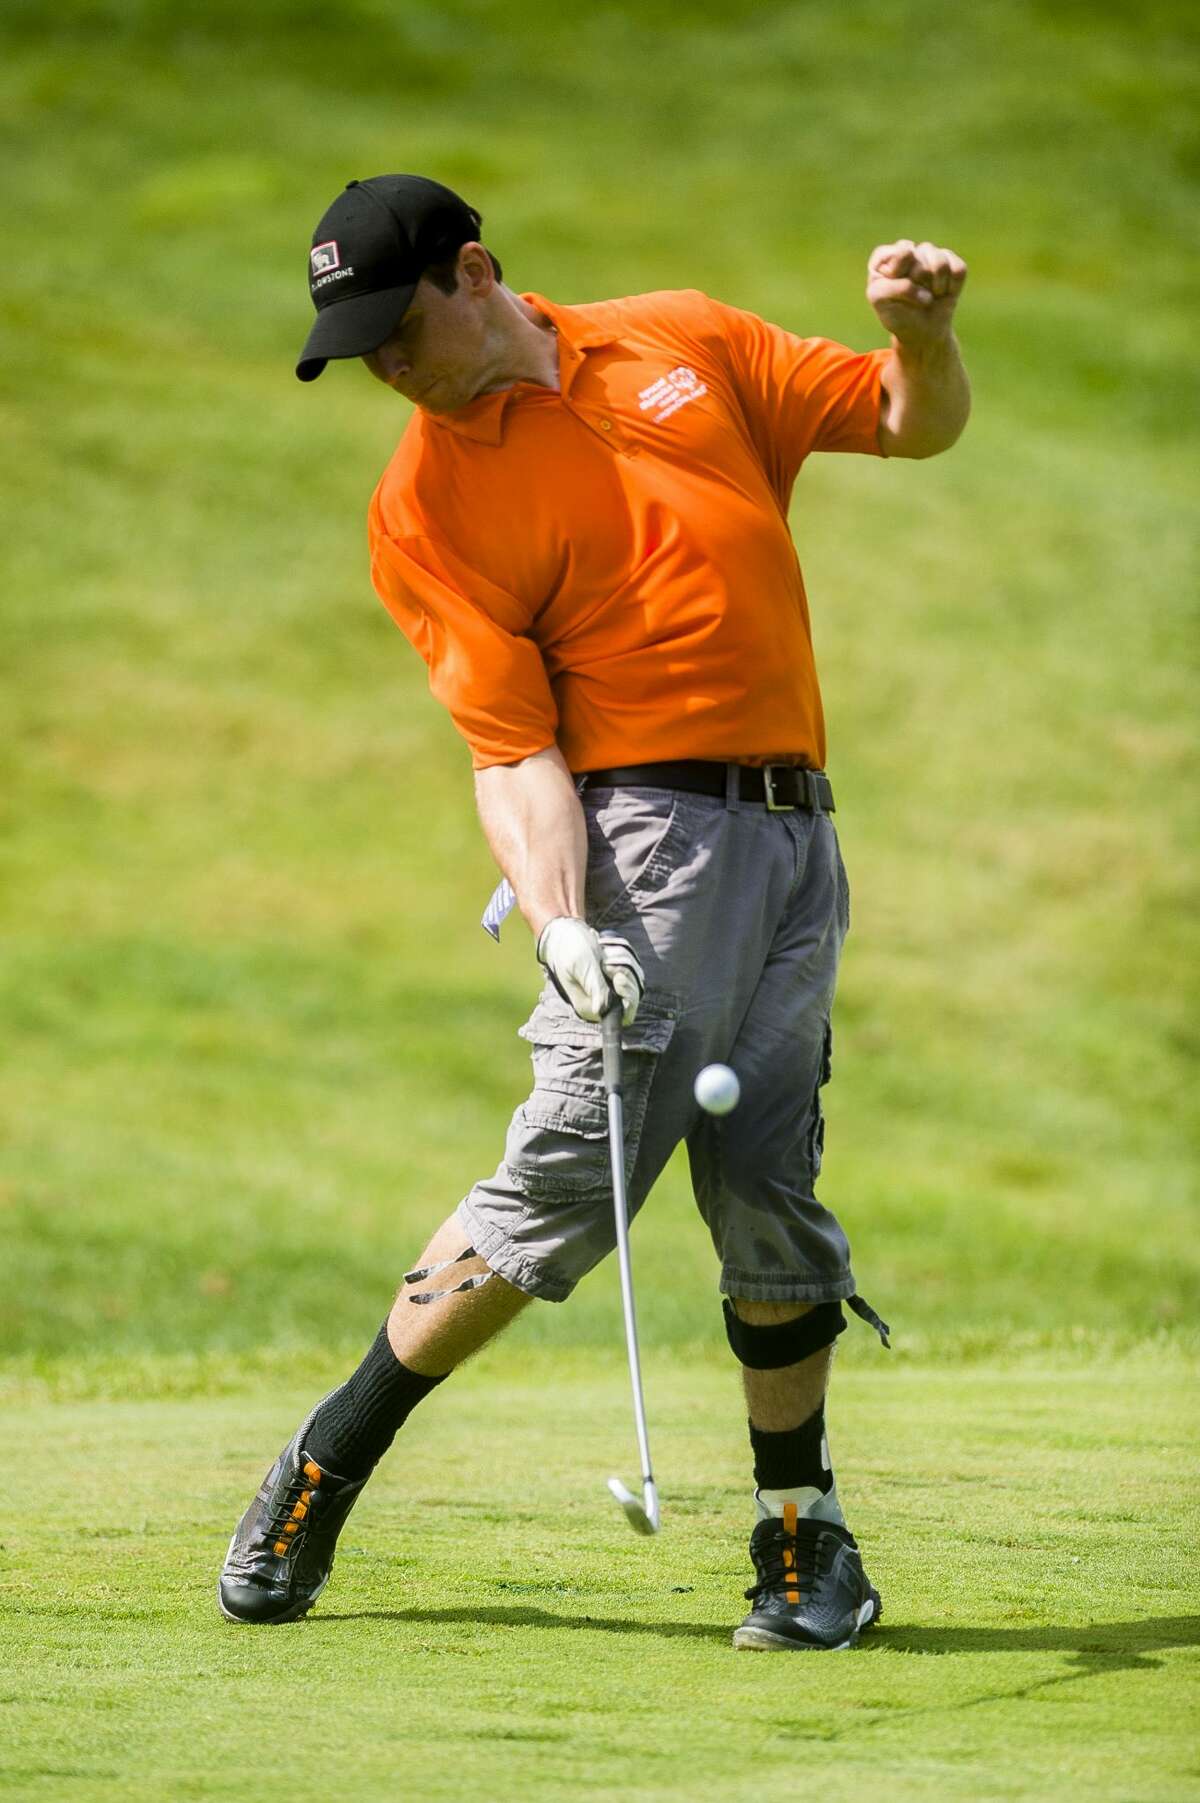 Justin Doran competes in the Special Olympics 3-Hole Challenge on Friday, July 19, 2019 at Midland Country Club. (Katy Kildee/kkildee@mdn.net)